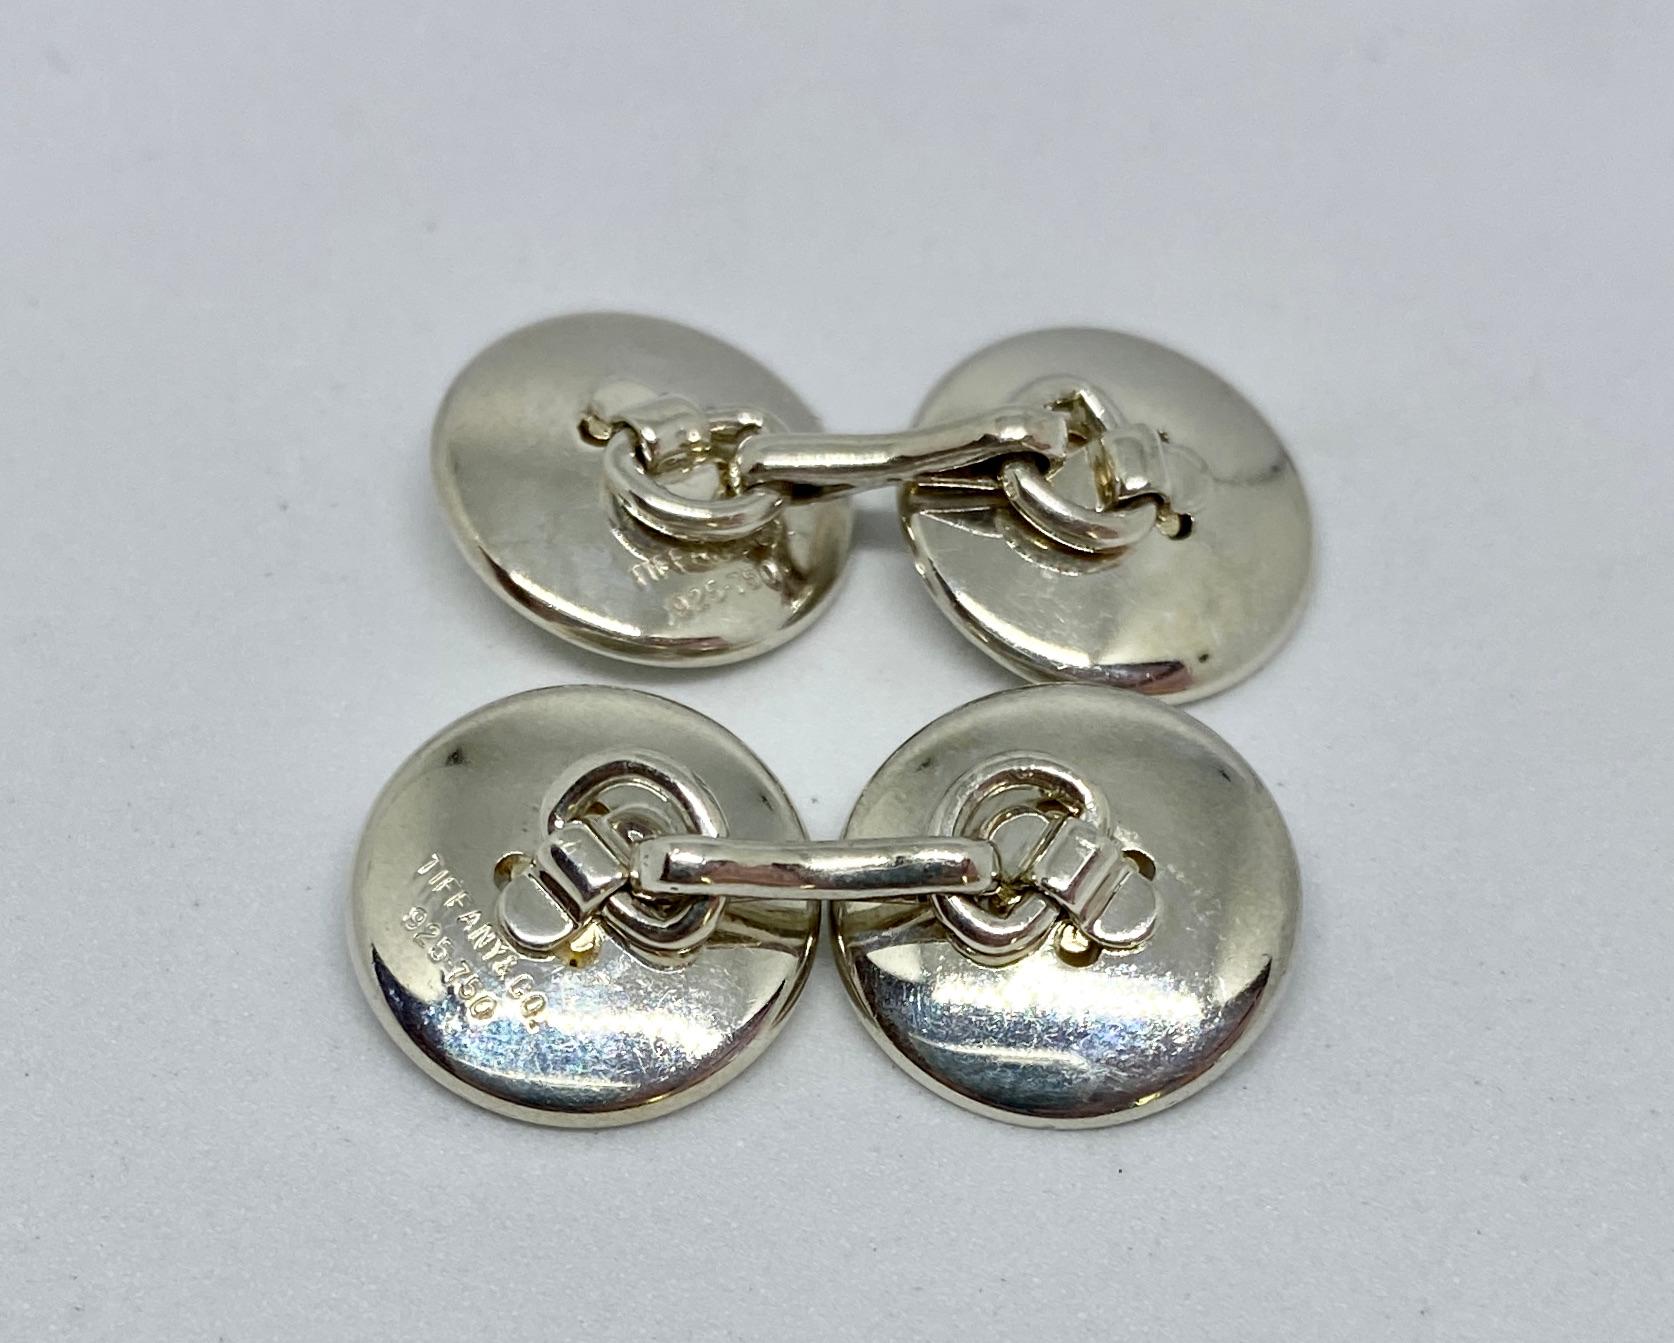 A classic and popular Tiffany design, yet hard to find in this desirable double-sided version.

The four sterling silver buttons each feature 18K yellow gold 